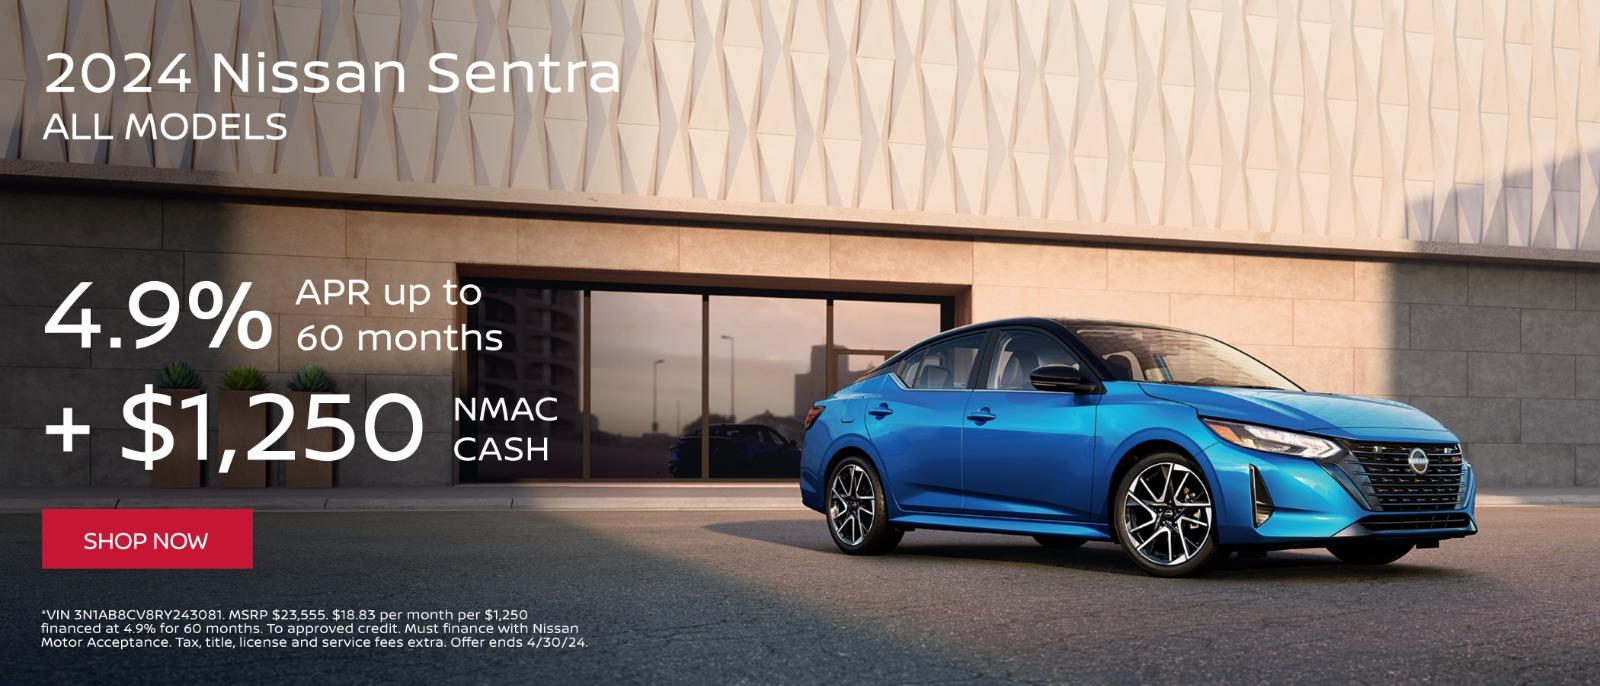 2024 Nissan Sentra 4.9% APR up to 60 months